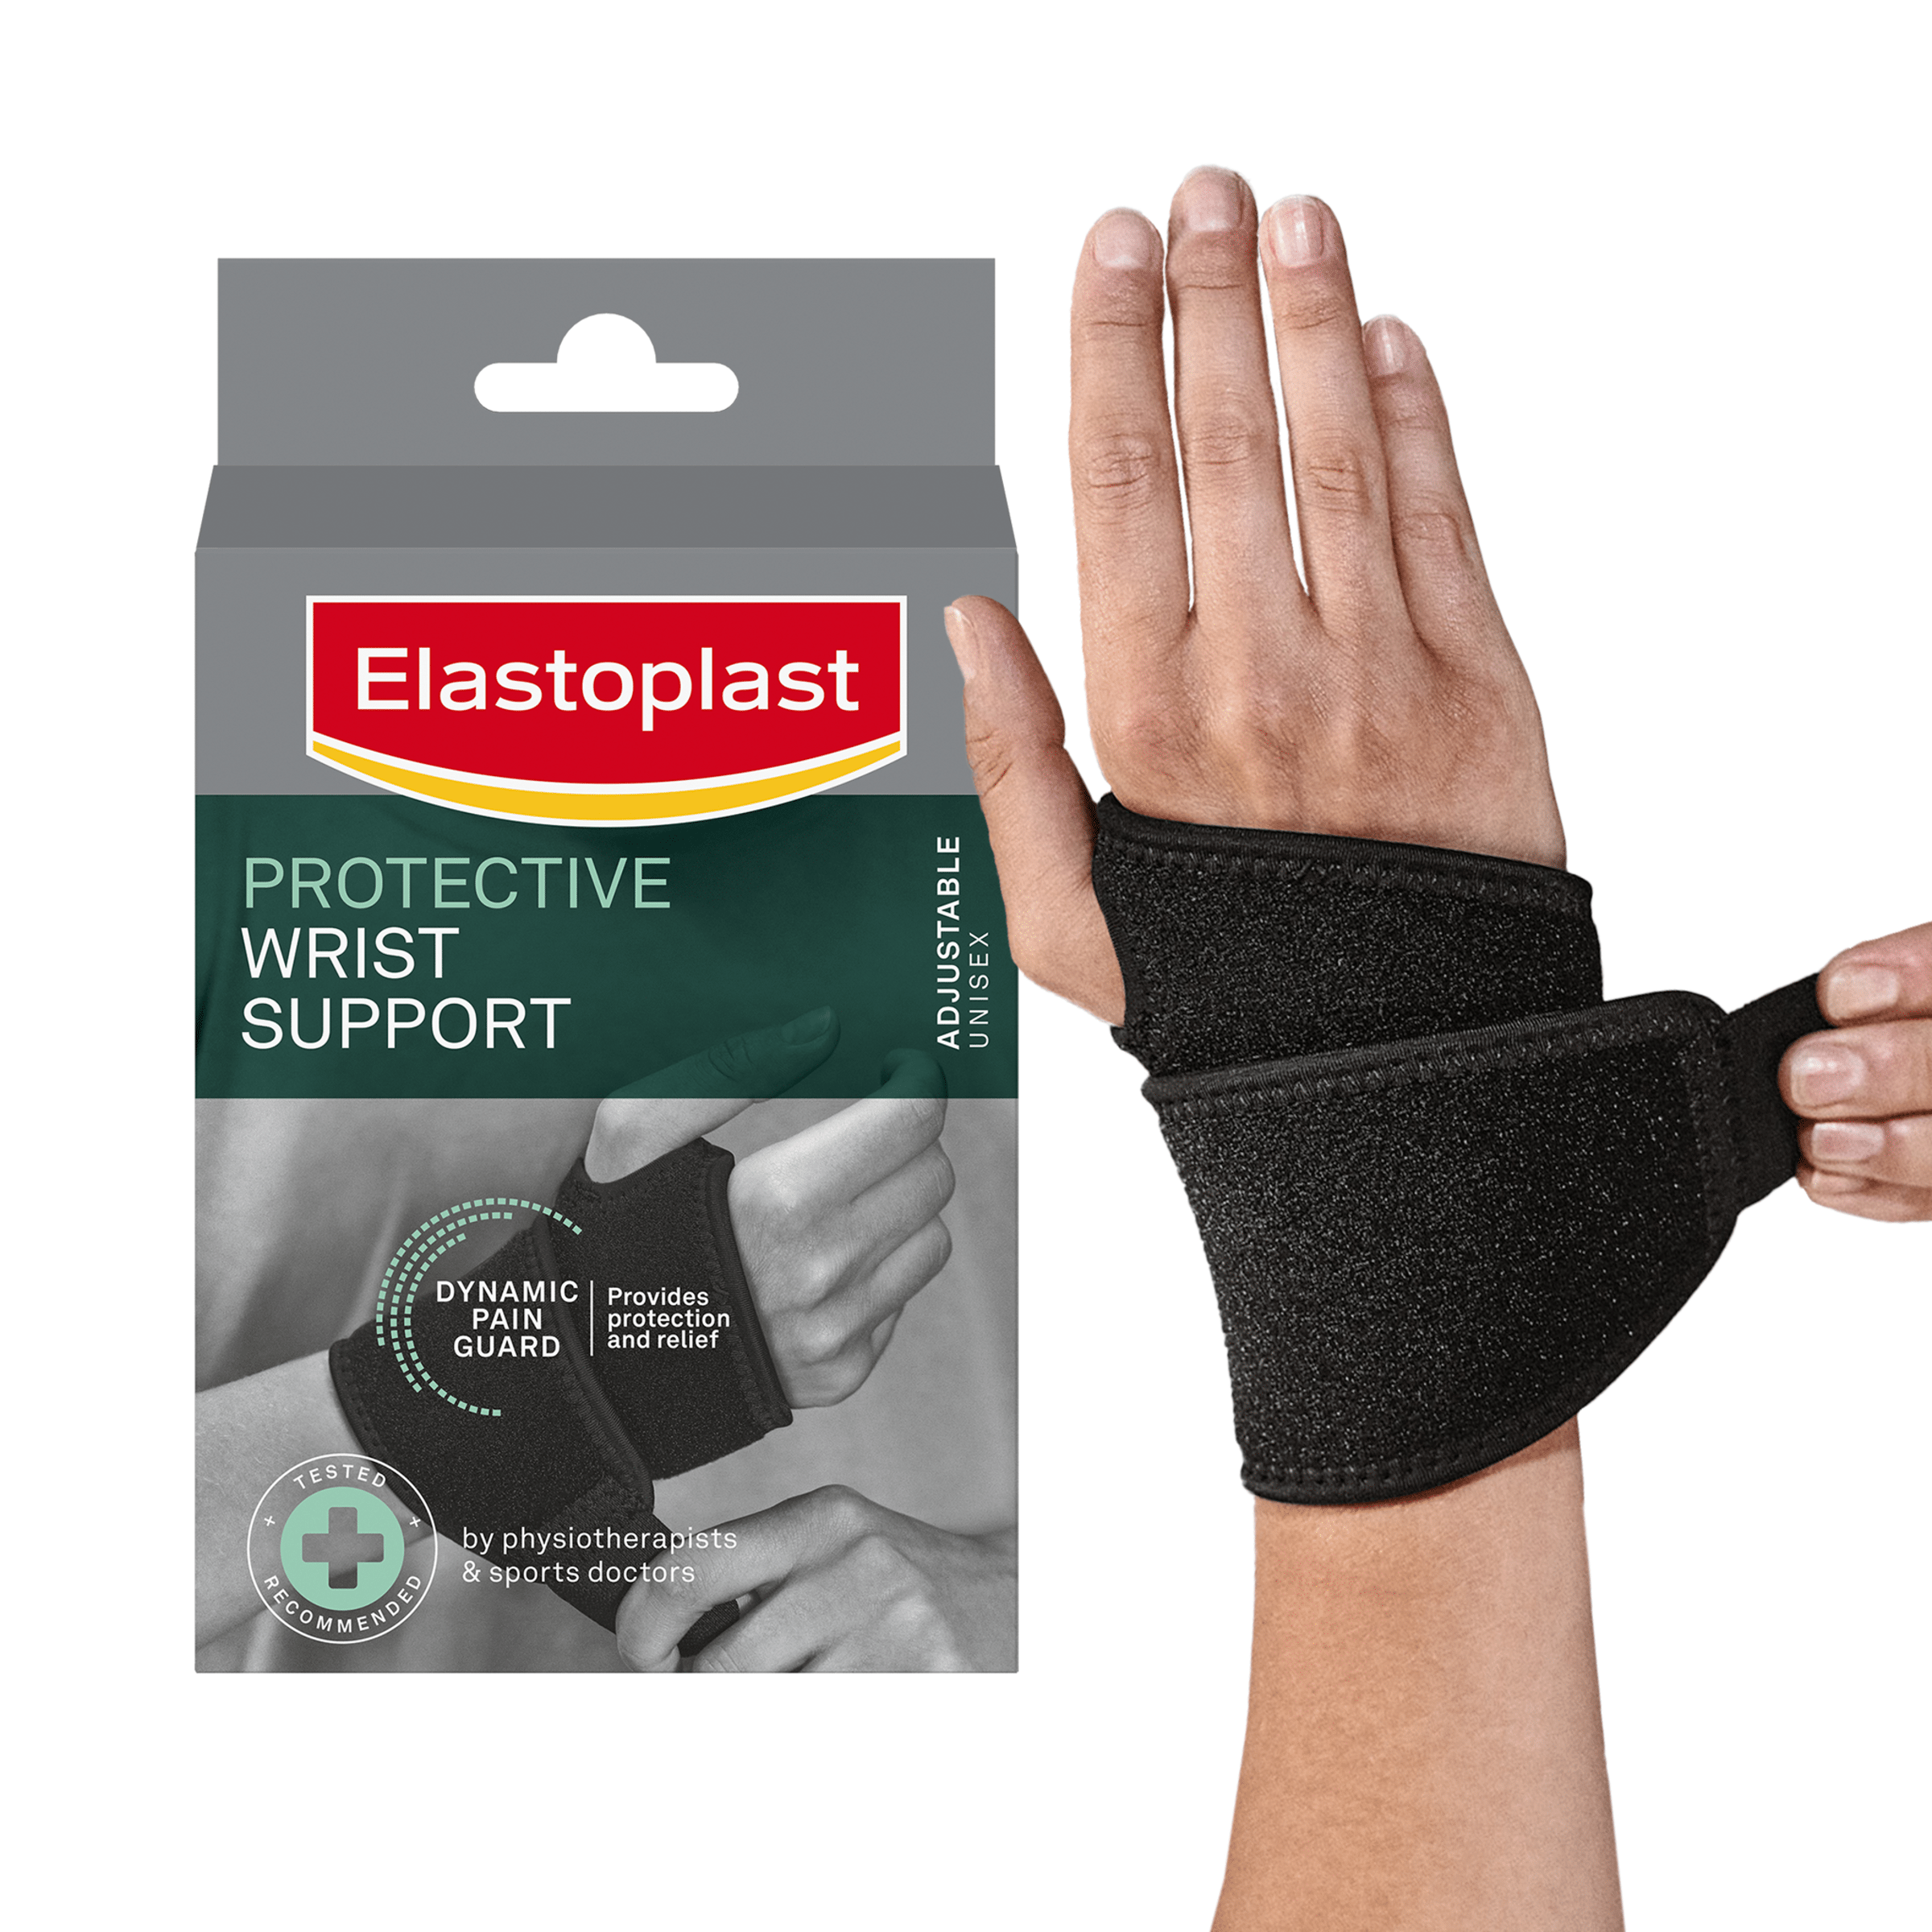 Protective Wrist Support - Provides protection and pain relief